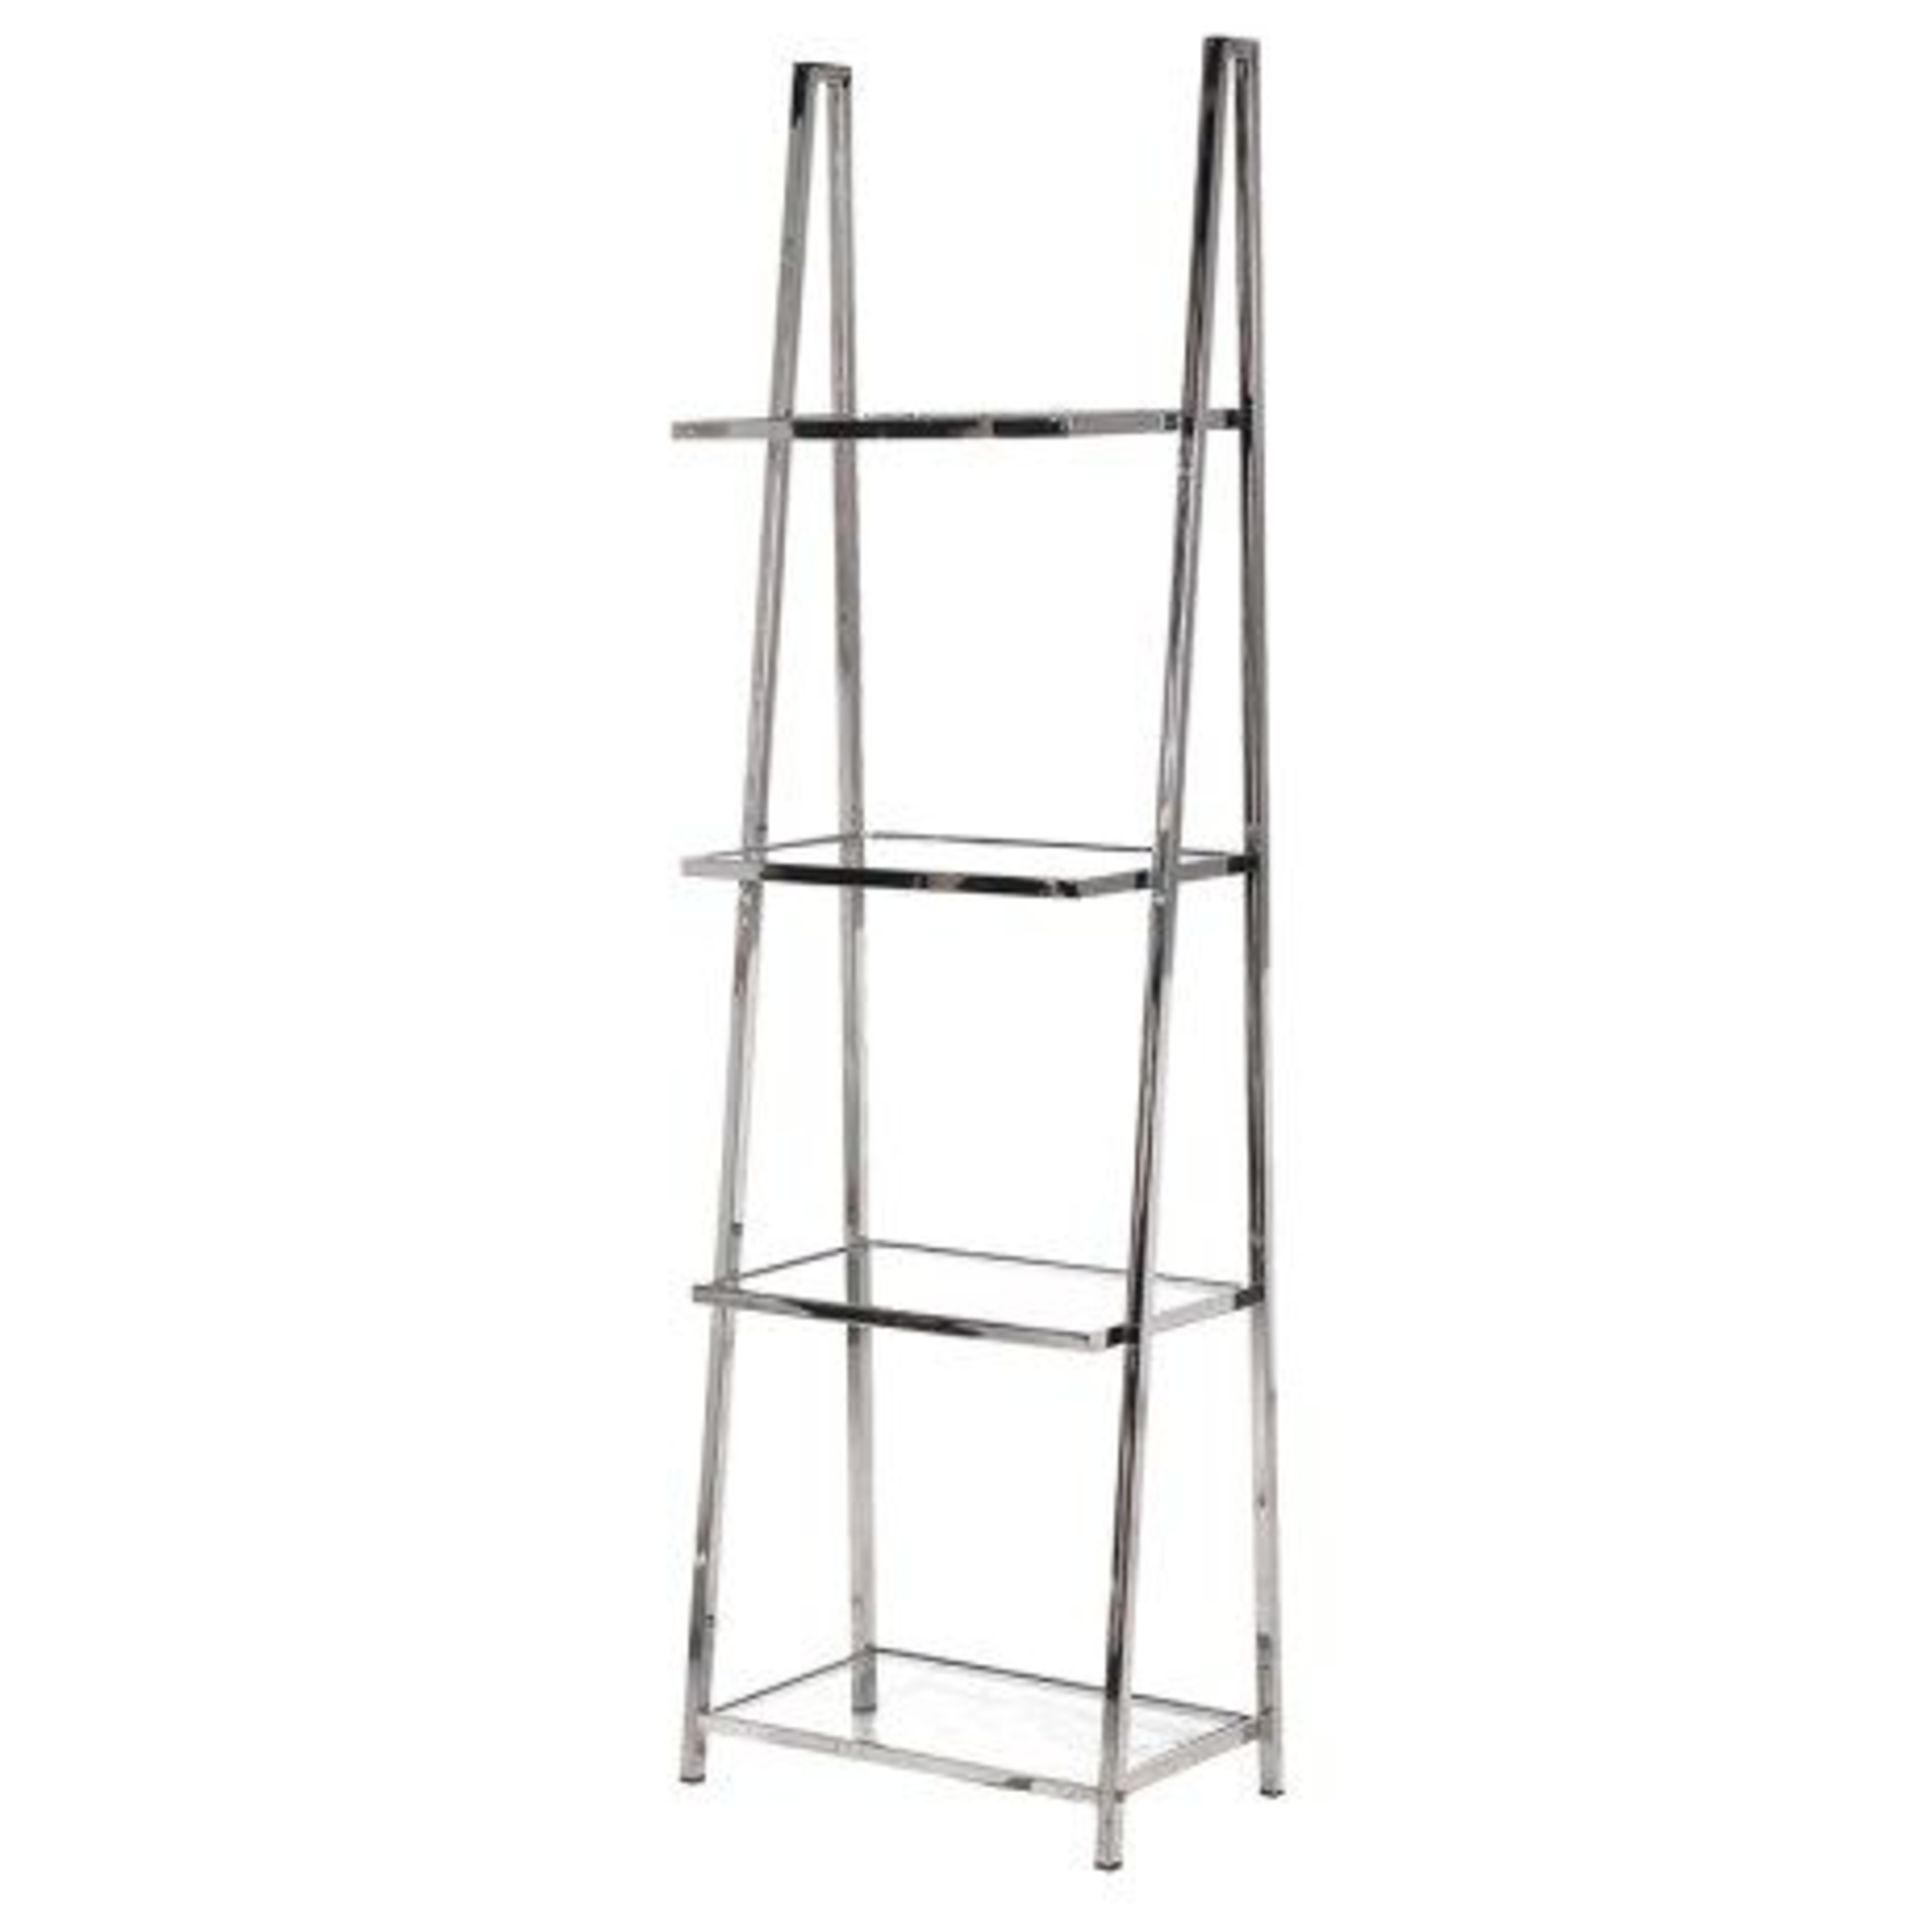 1 x Terano Four Tier Shelf Display Unit - New and Boxed - H175 x W54 x D30 cms - CL011 - Location: